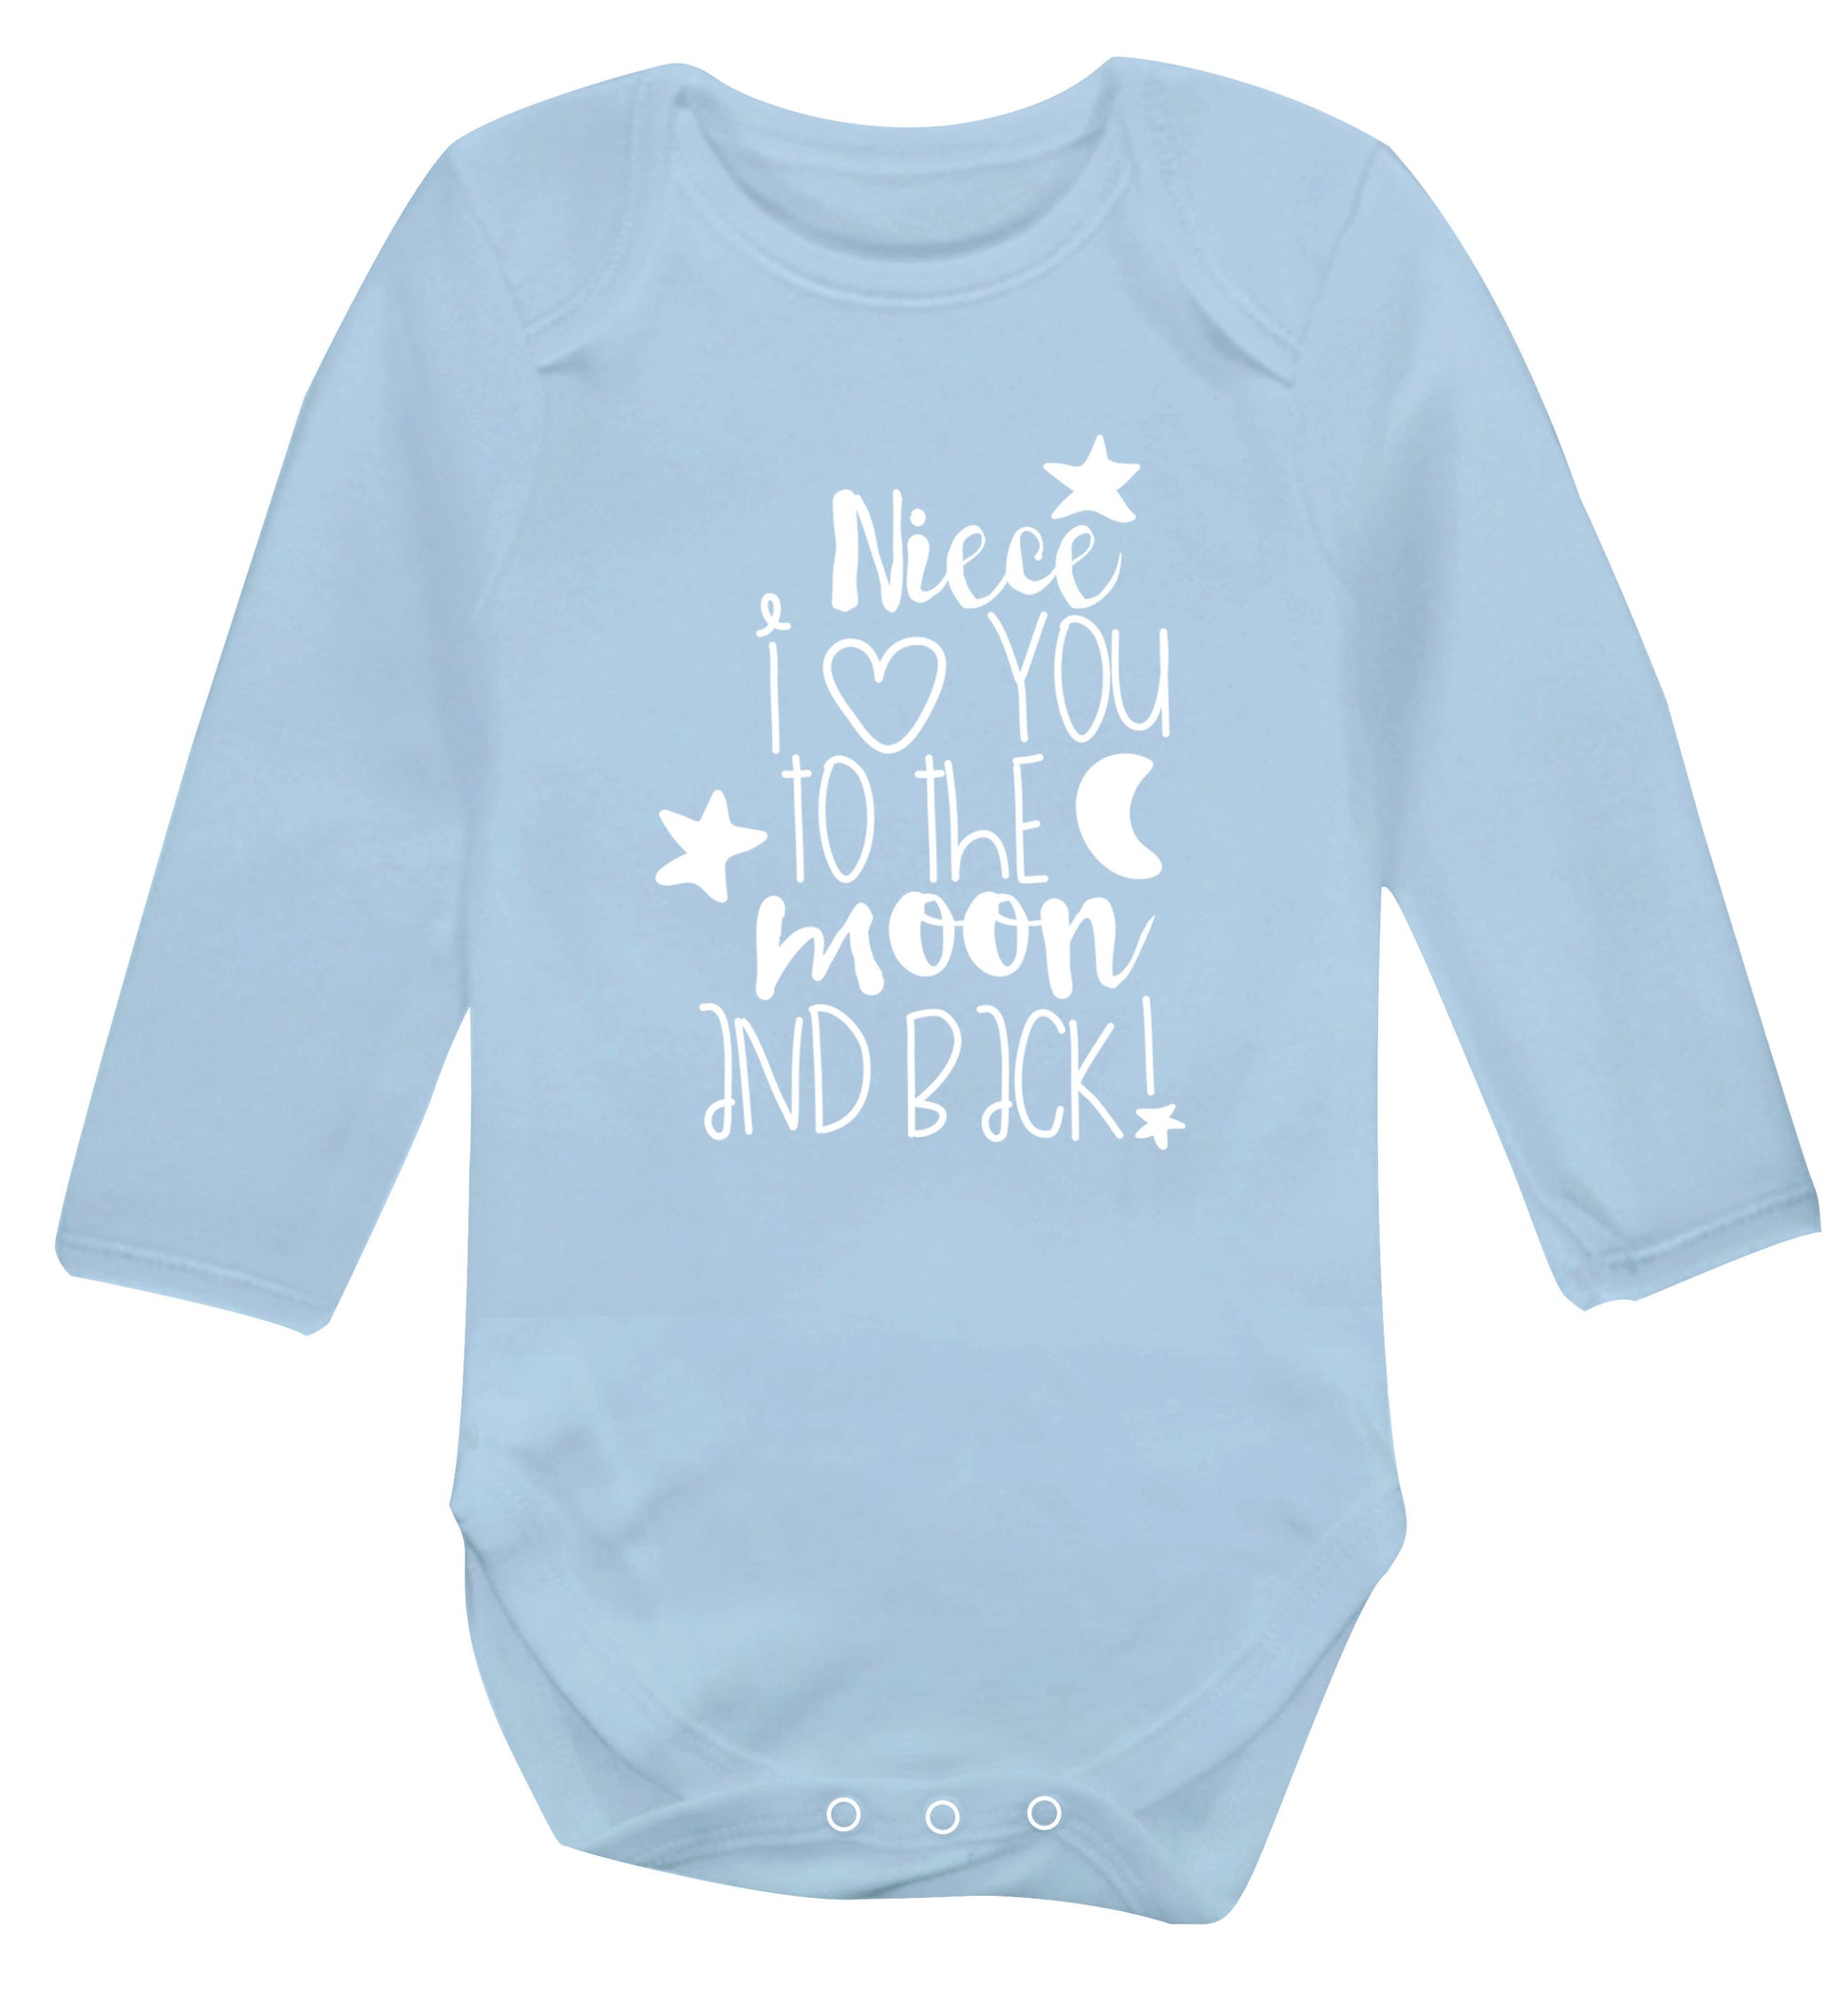 Niece I love you to the moon and back Baby Vest long sleeved pale blue 6-12 months